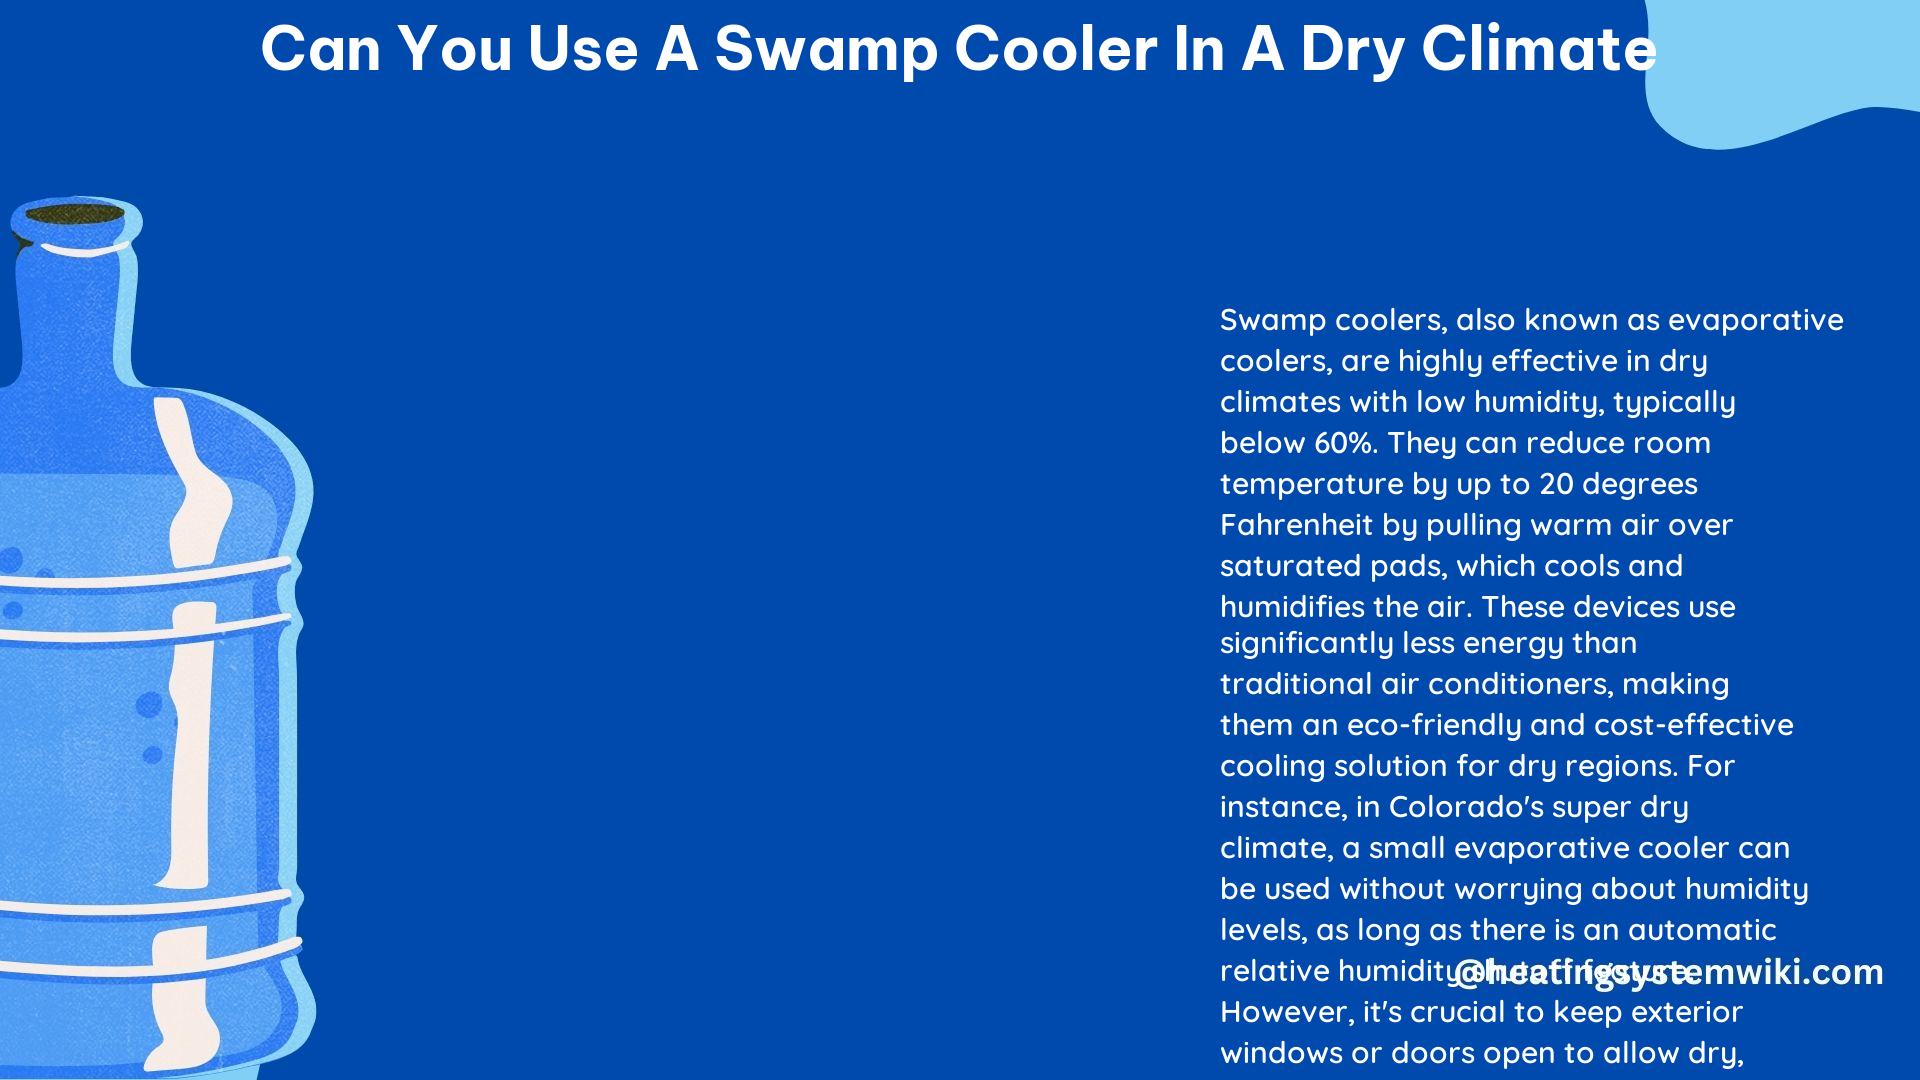 Can You Use a Swamp Cooler in a Dry Climate